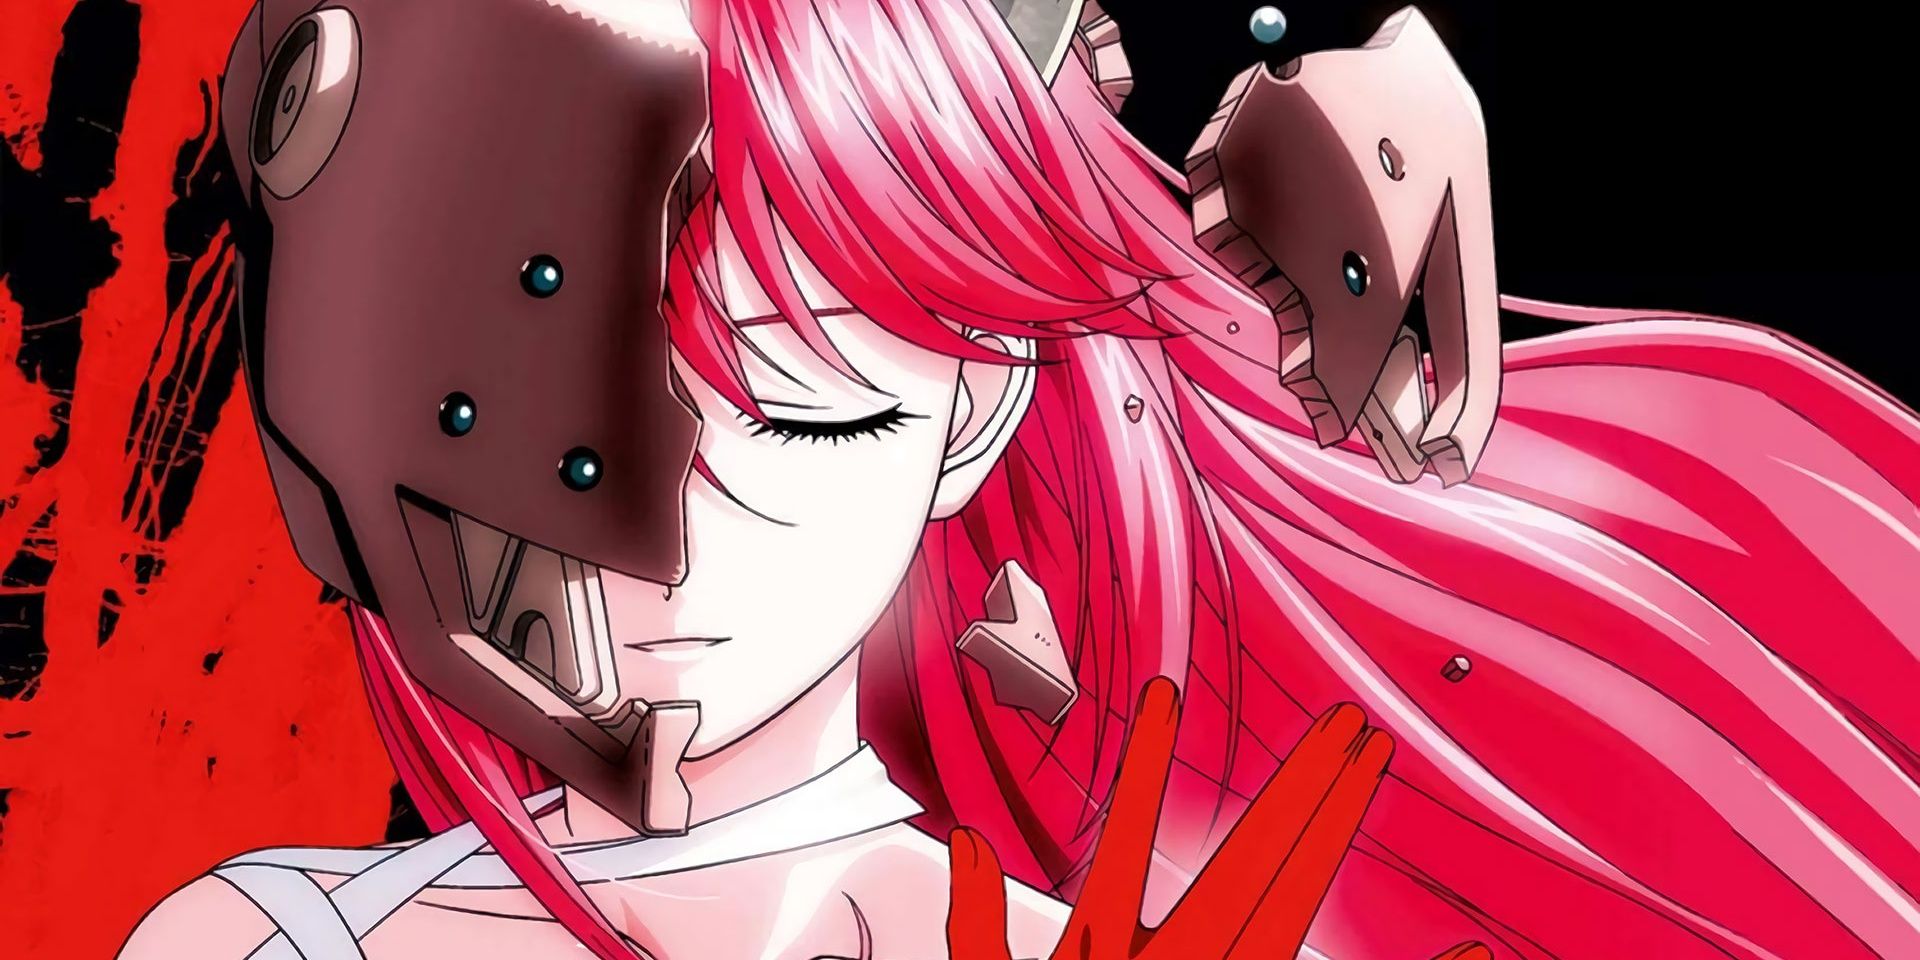 Lucy from Elfen Lied.